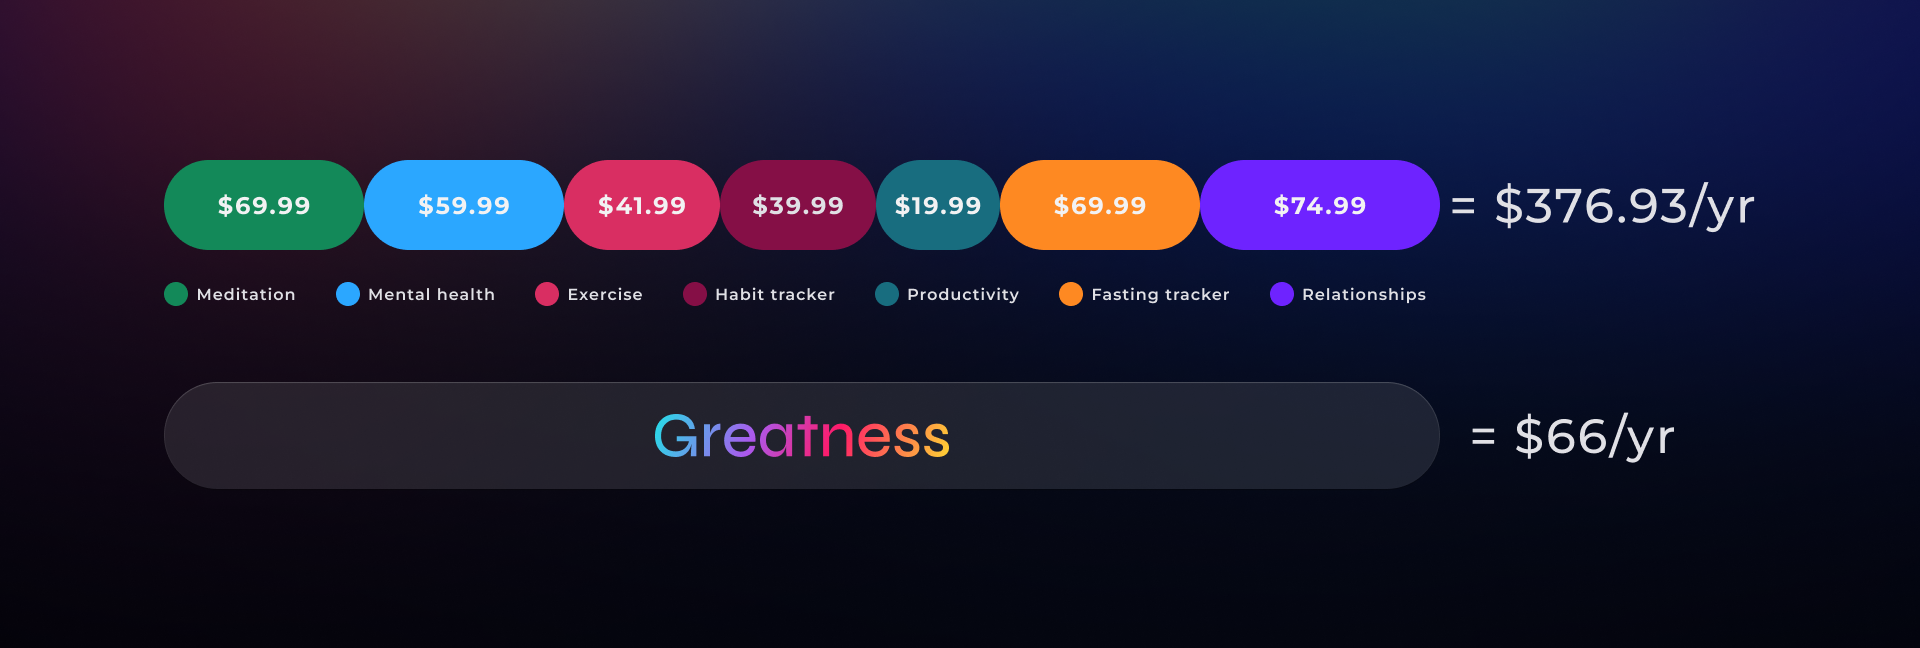 Greatness App Review Micro-Habits and the Secret to Lasting Lifestyle Change 5